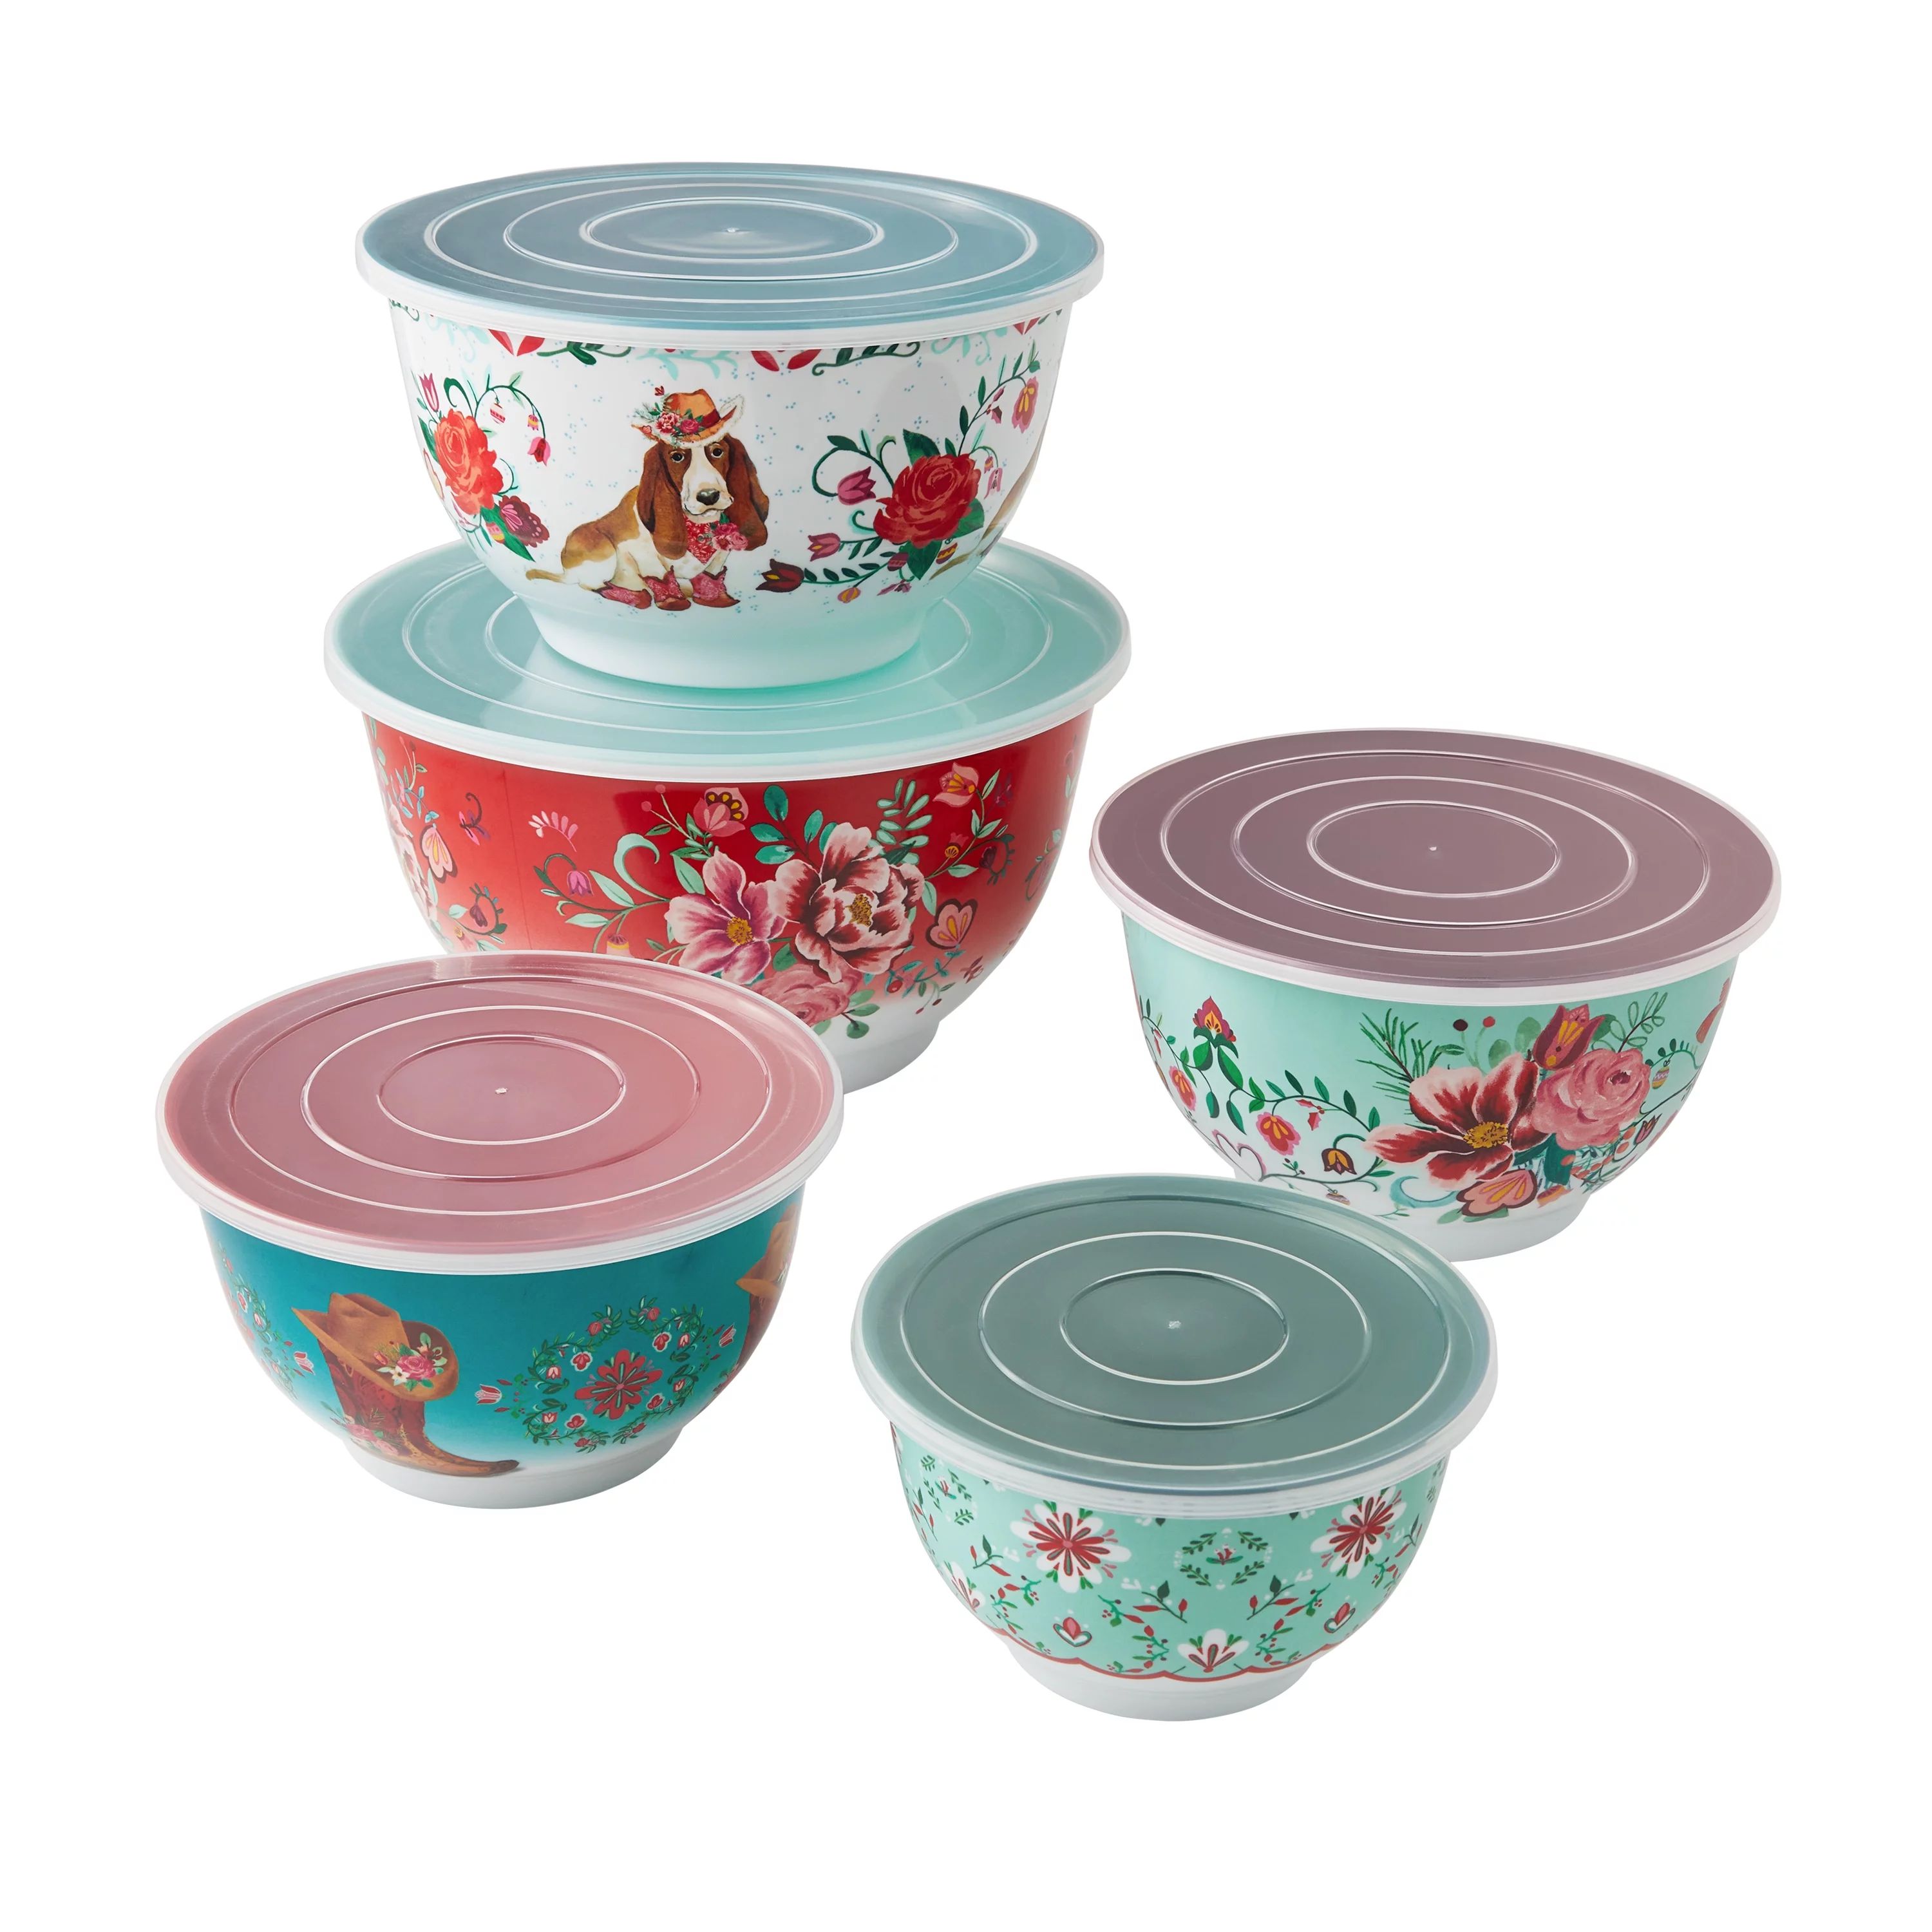 The Pioneer Woman Merry Meadows 10-Piece Melamine Mixing Bowl Set with Lids | Walmart (US)